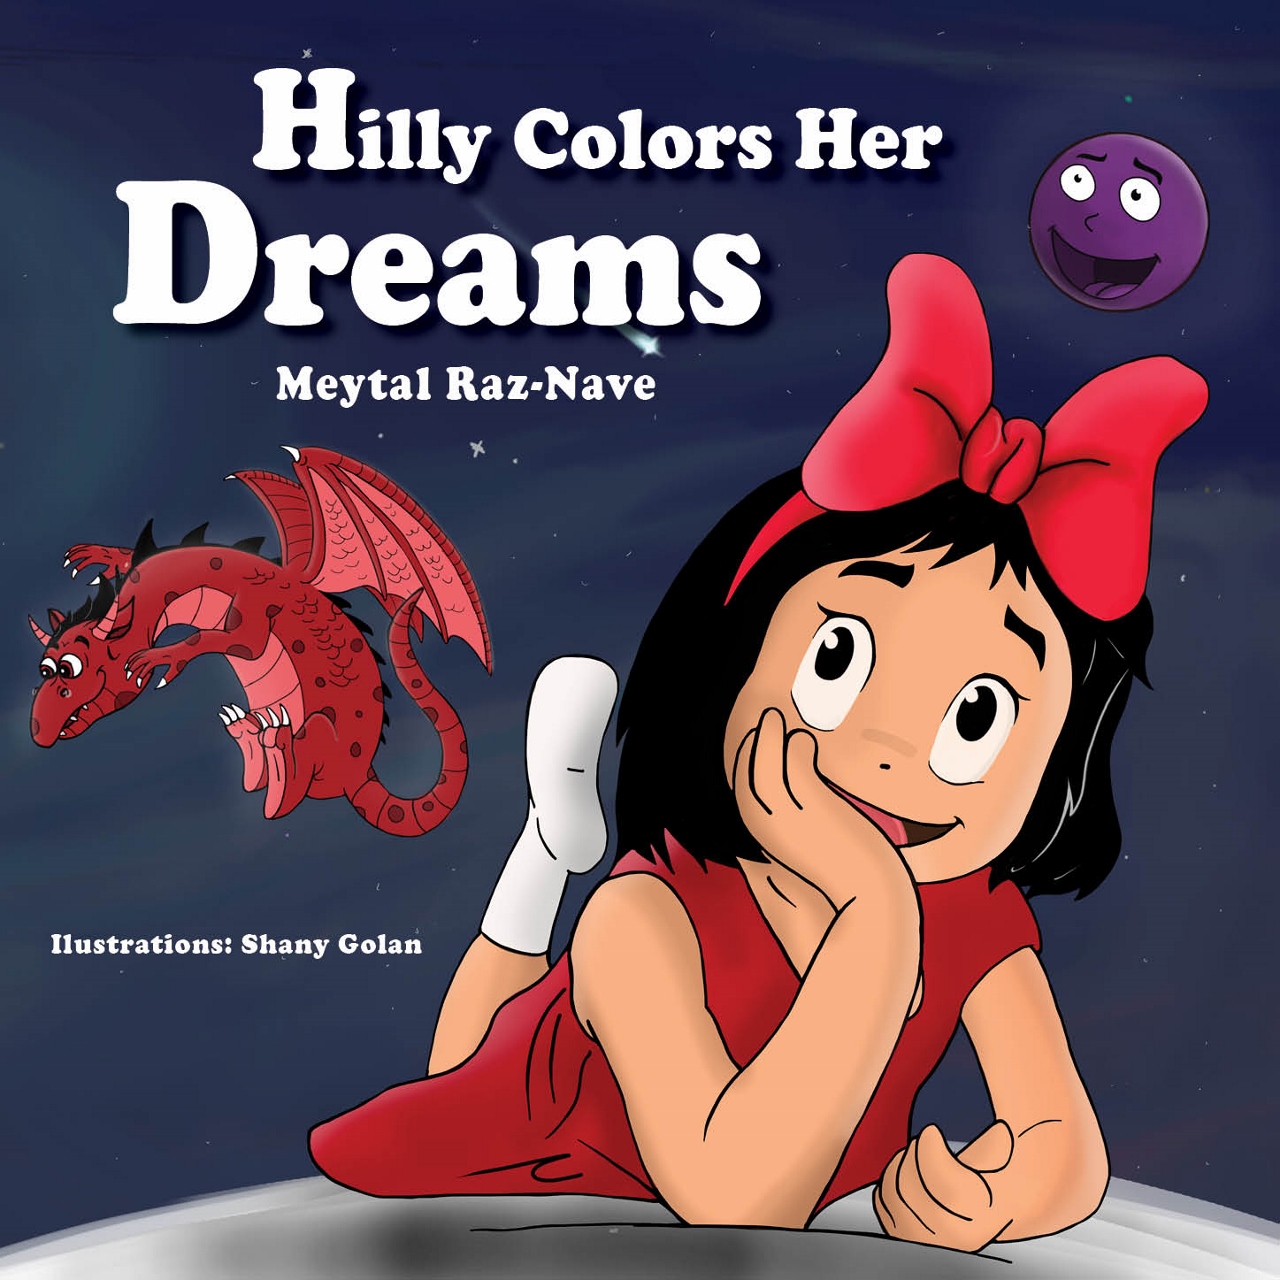 FREE: Hilly Colors Her Dreams by Meytal Raz-Nave